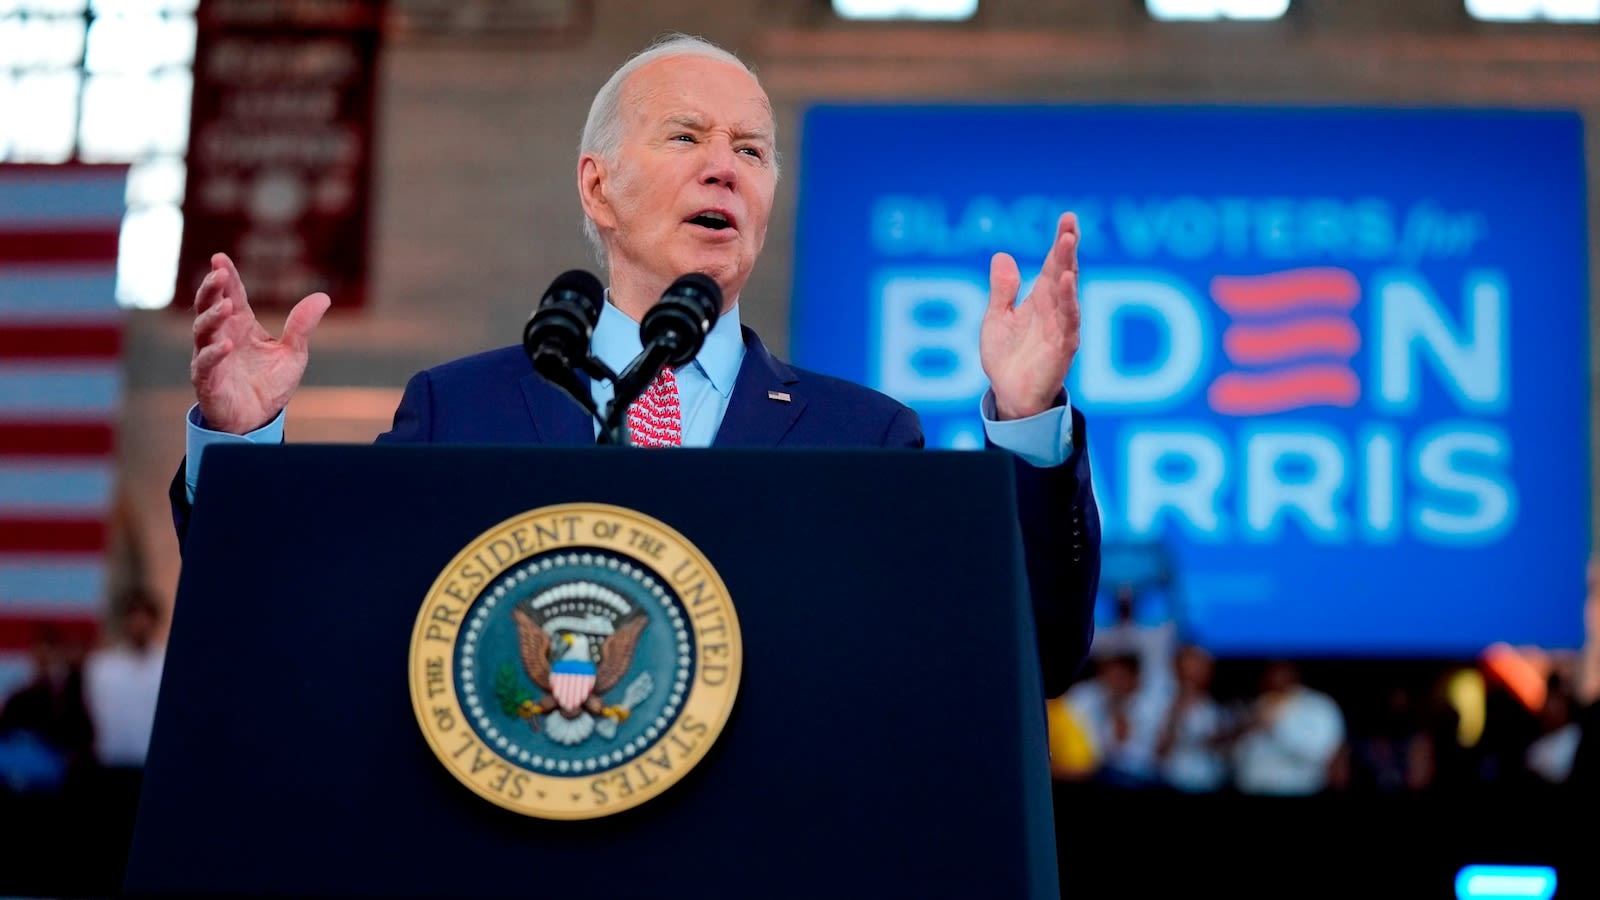 Biden campaign to air ad during NBA Finals coverage